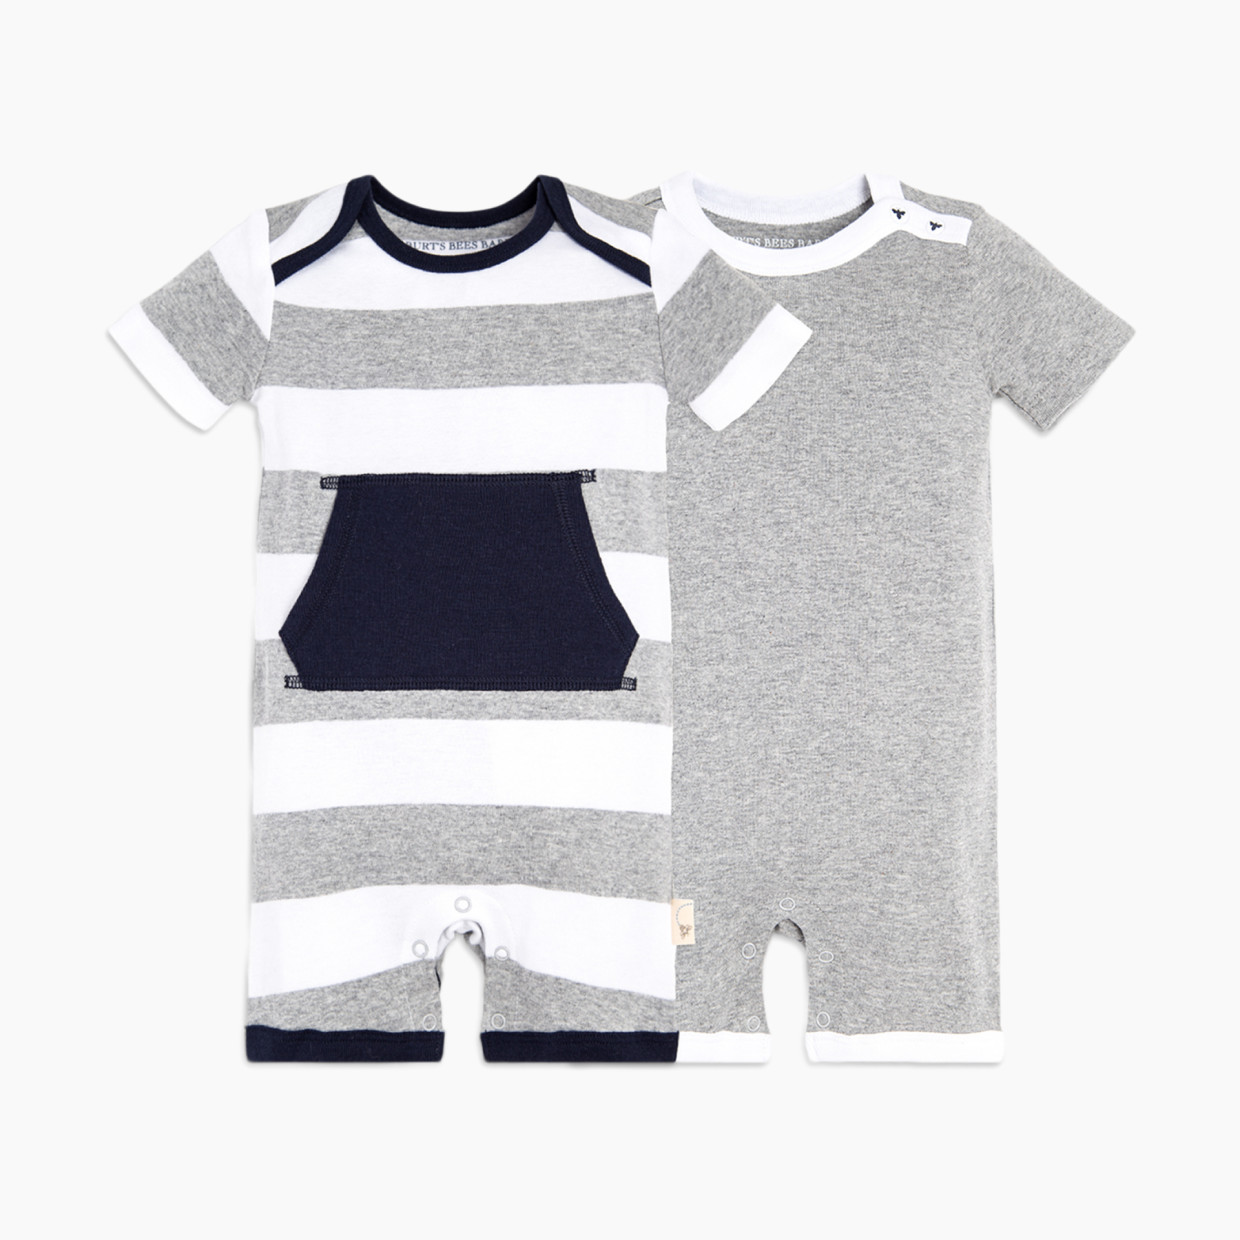 Burt's Bees Baby 2 Pack Rompers - Heather Grey Pocket, 12 Months.